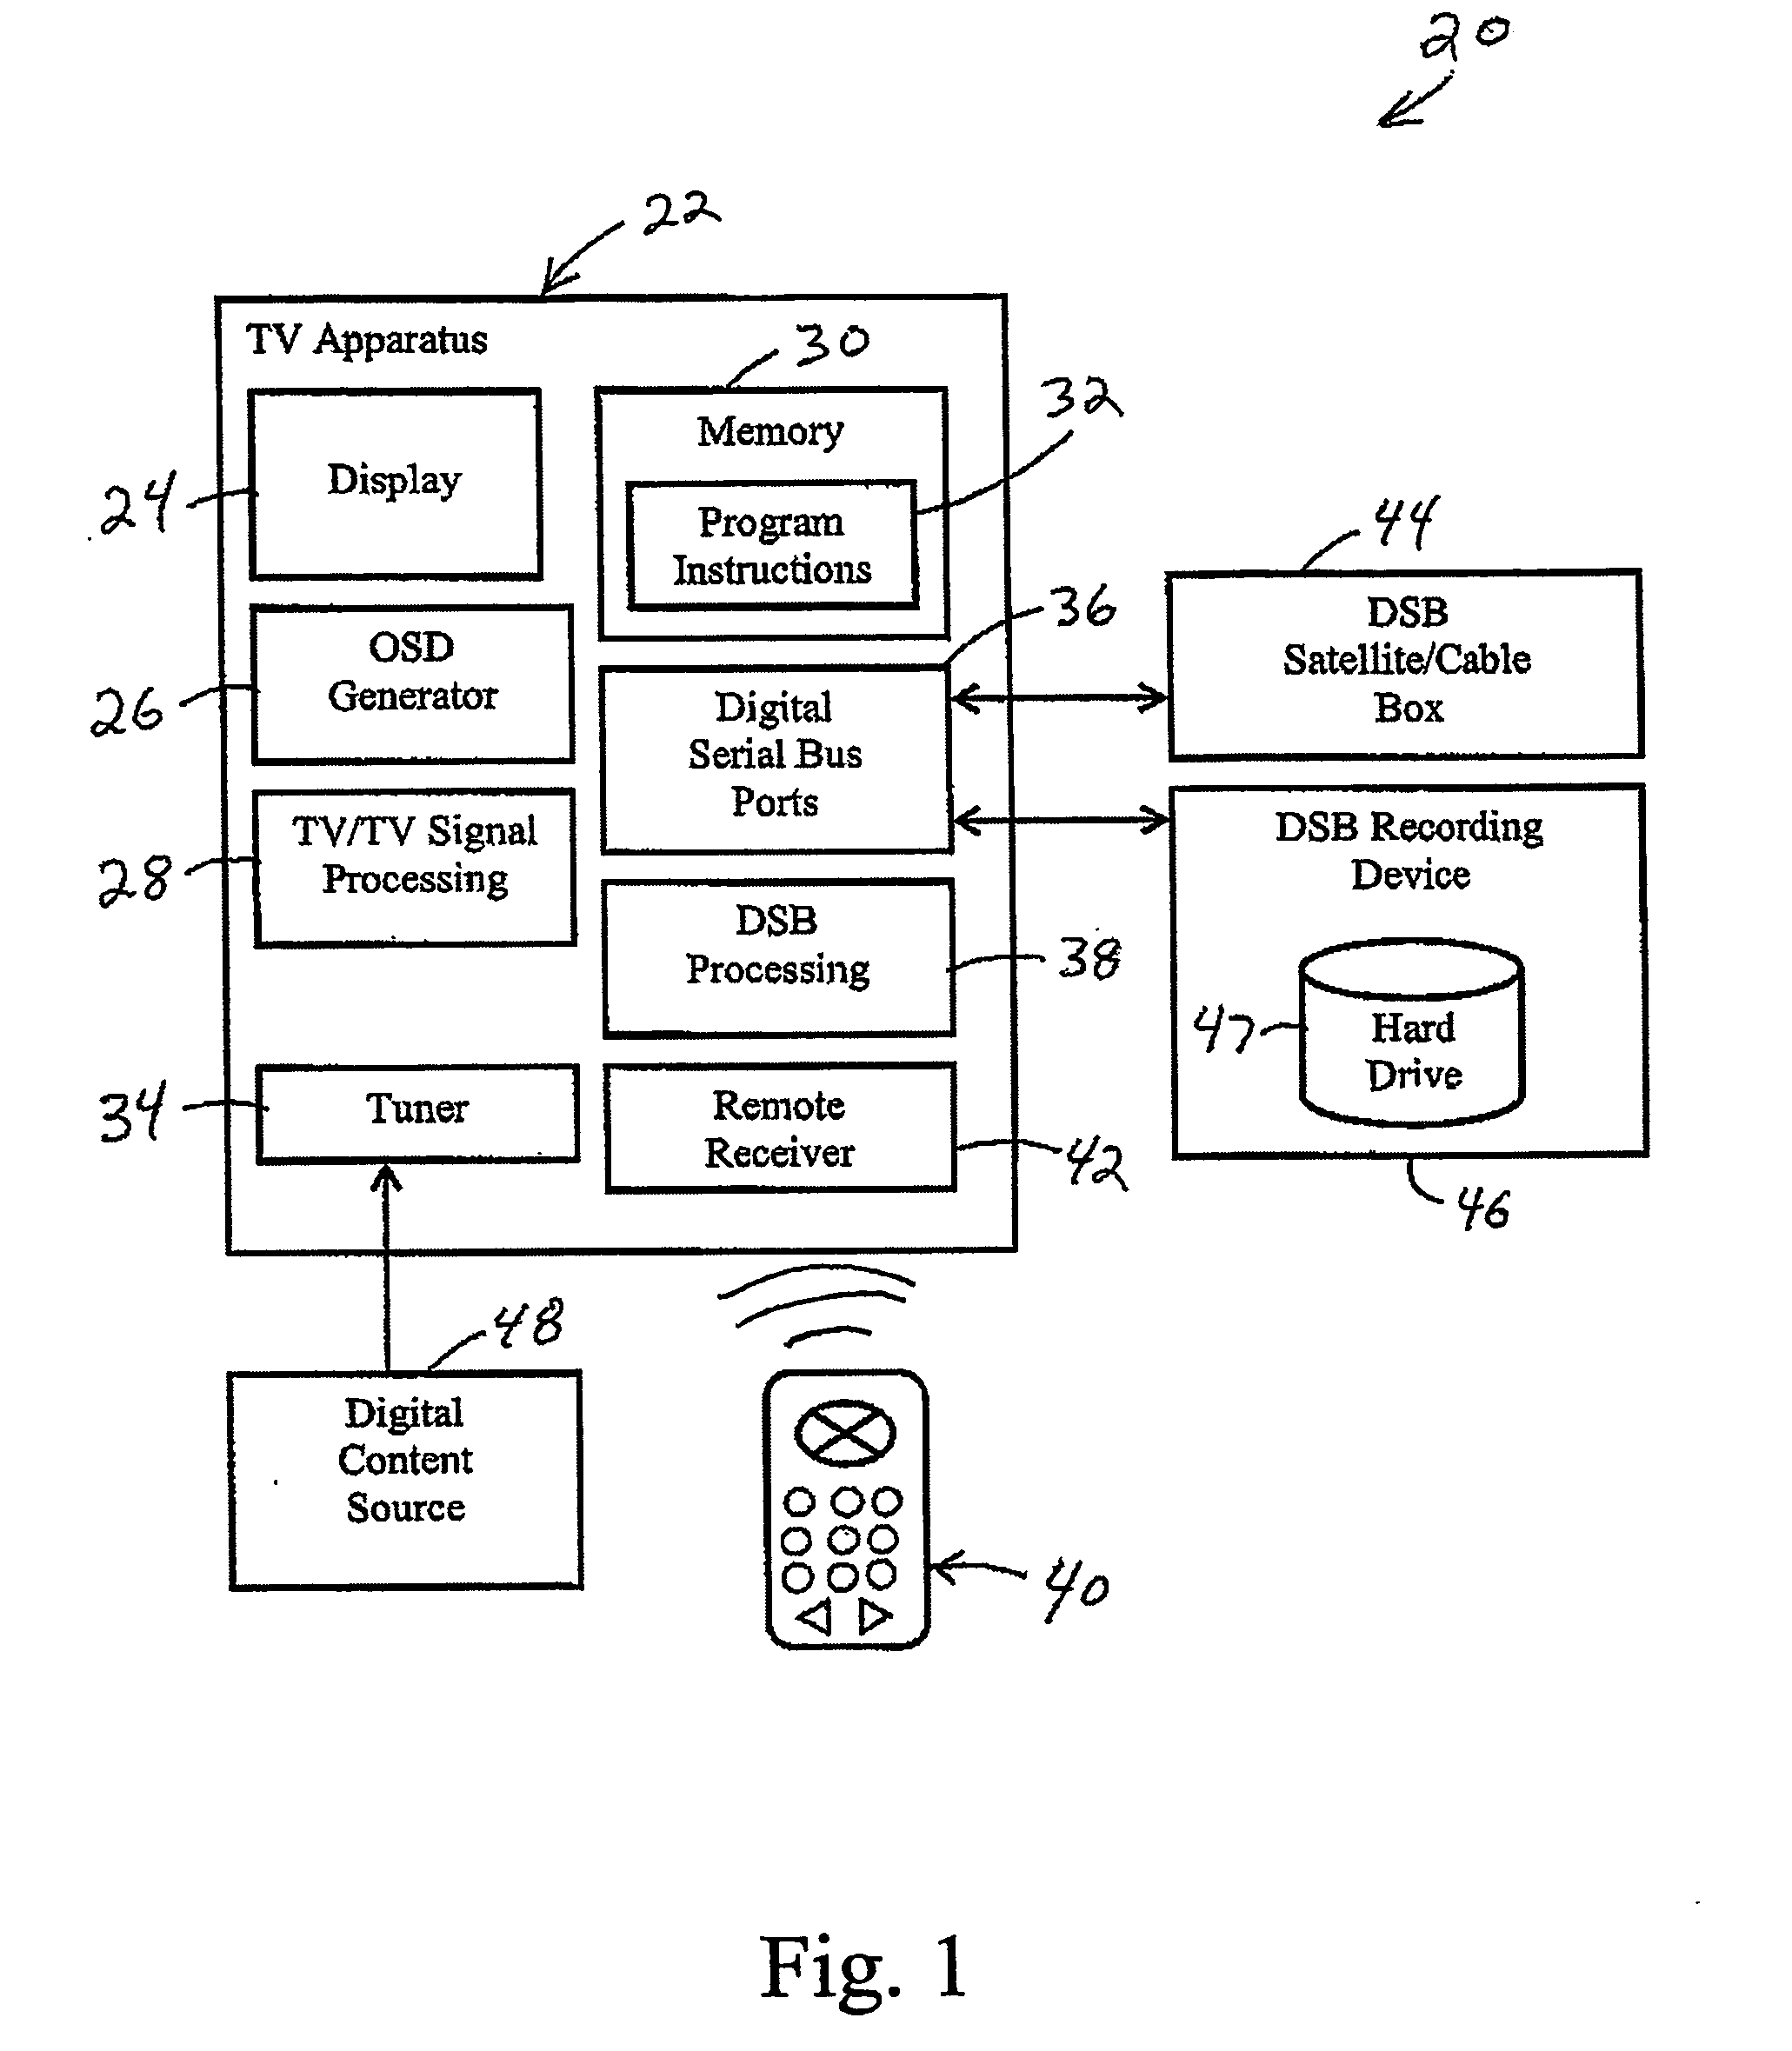 Method and apparatus for providing simplified peer-to-peer recording